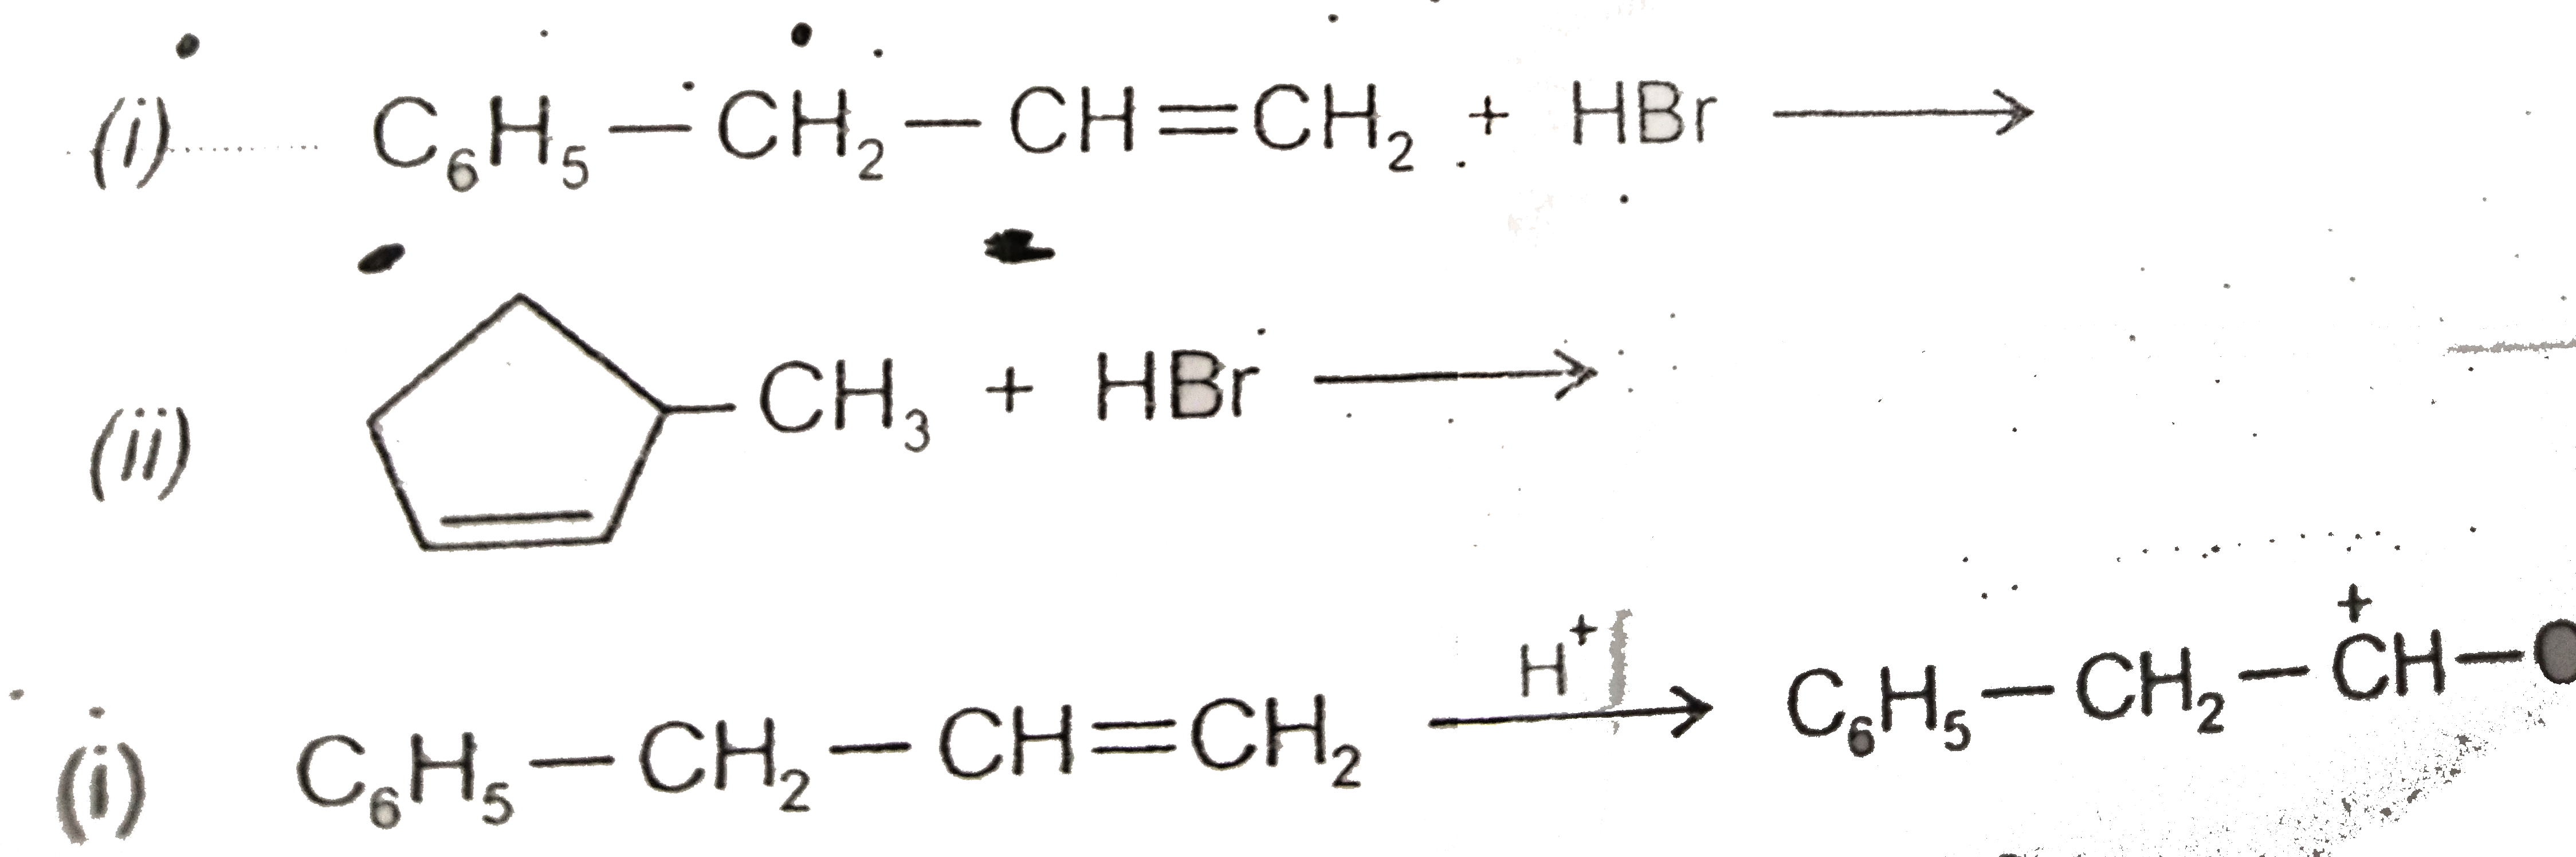 What  are the  major products  formed  in the  following  reactions ?    (i) C(6) H(5)  - CH(2)  - CH = CH(2) + HBr to